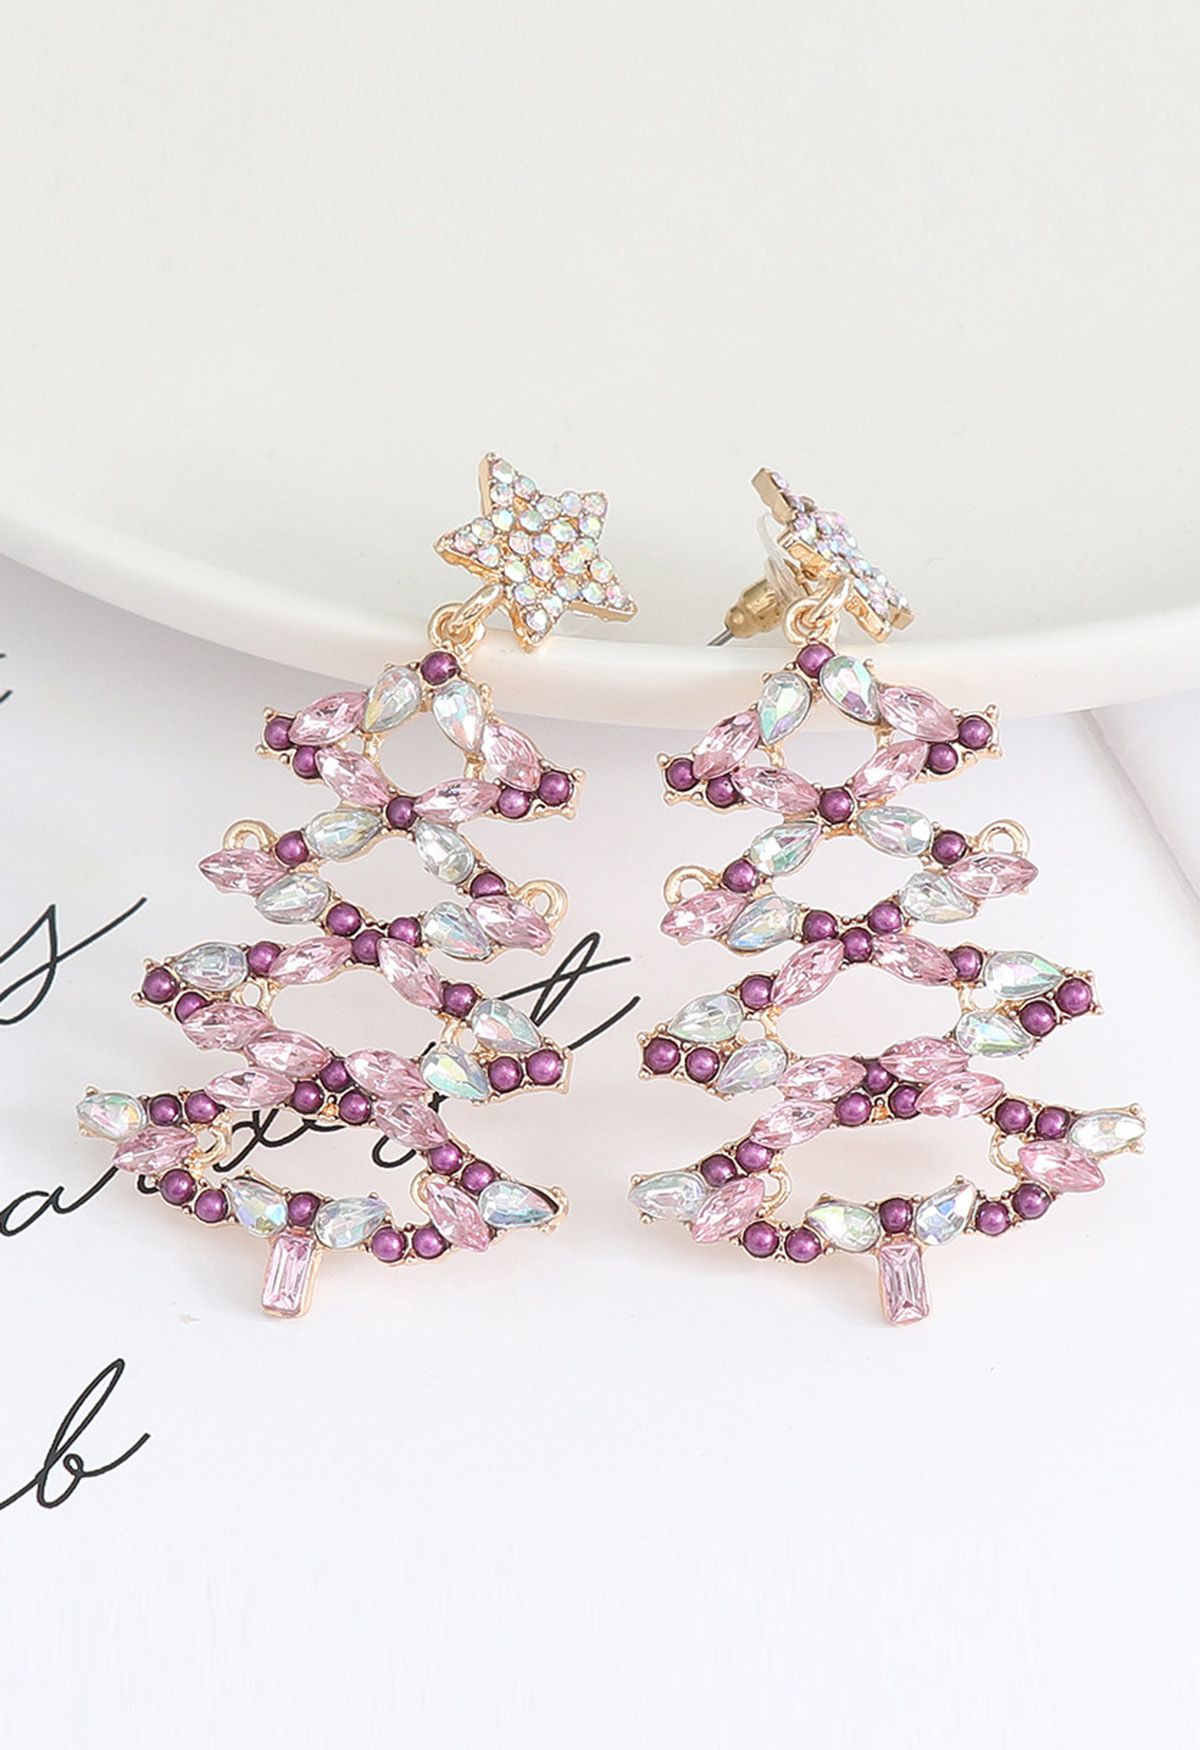 Hollow Out Christmas Tree Rhinestone Earrings in Pink